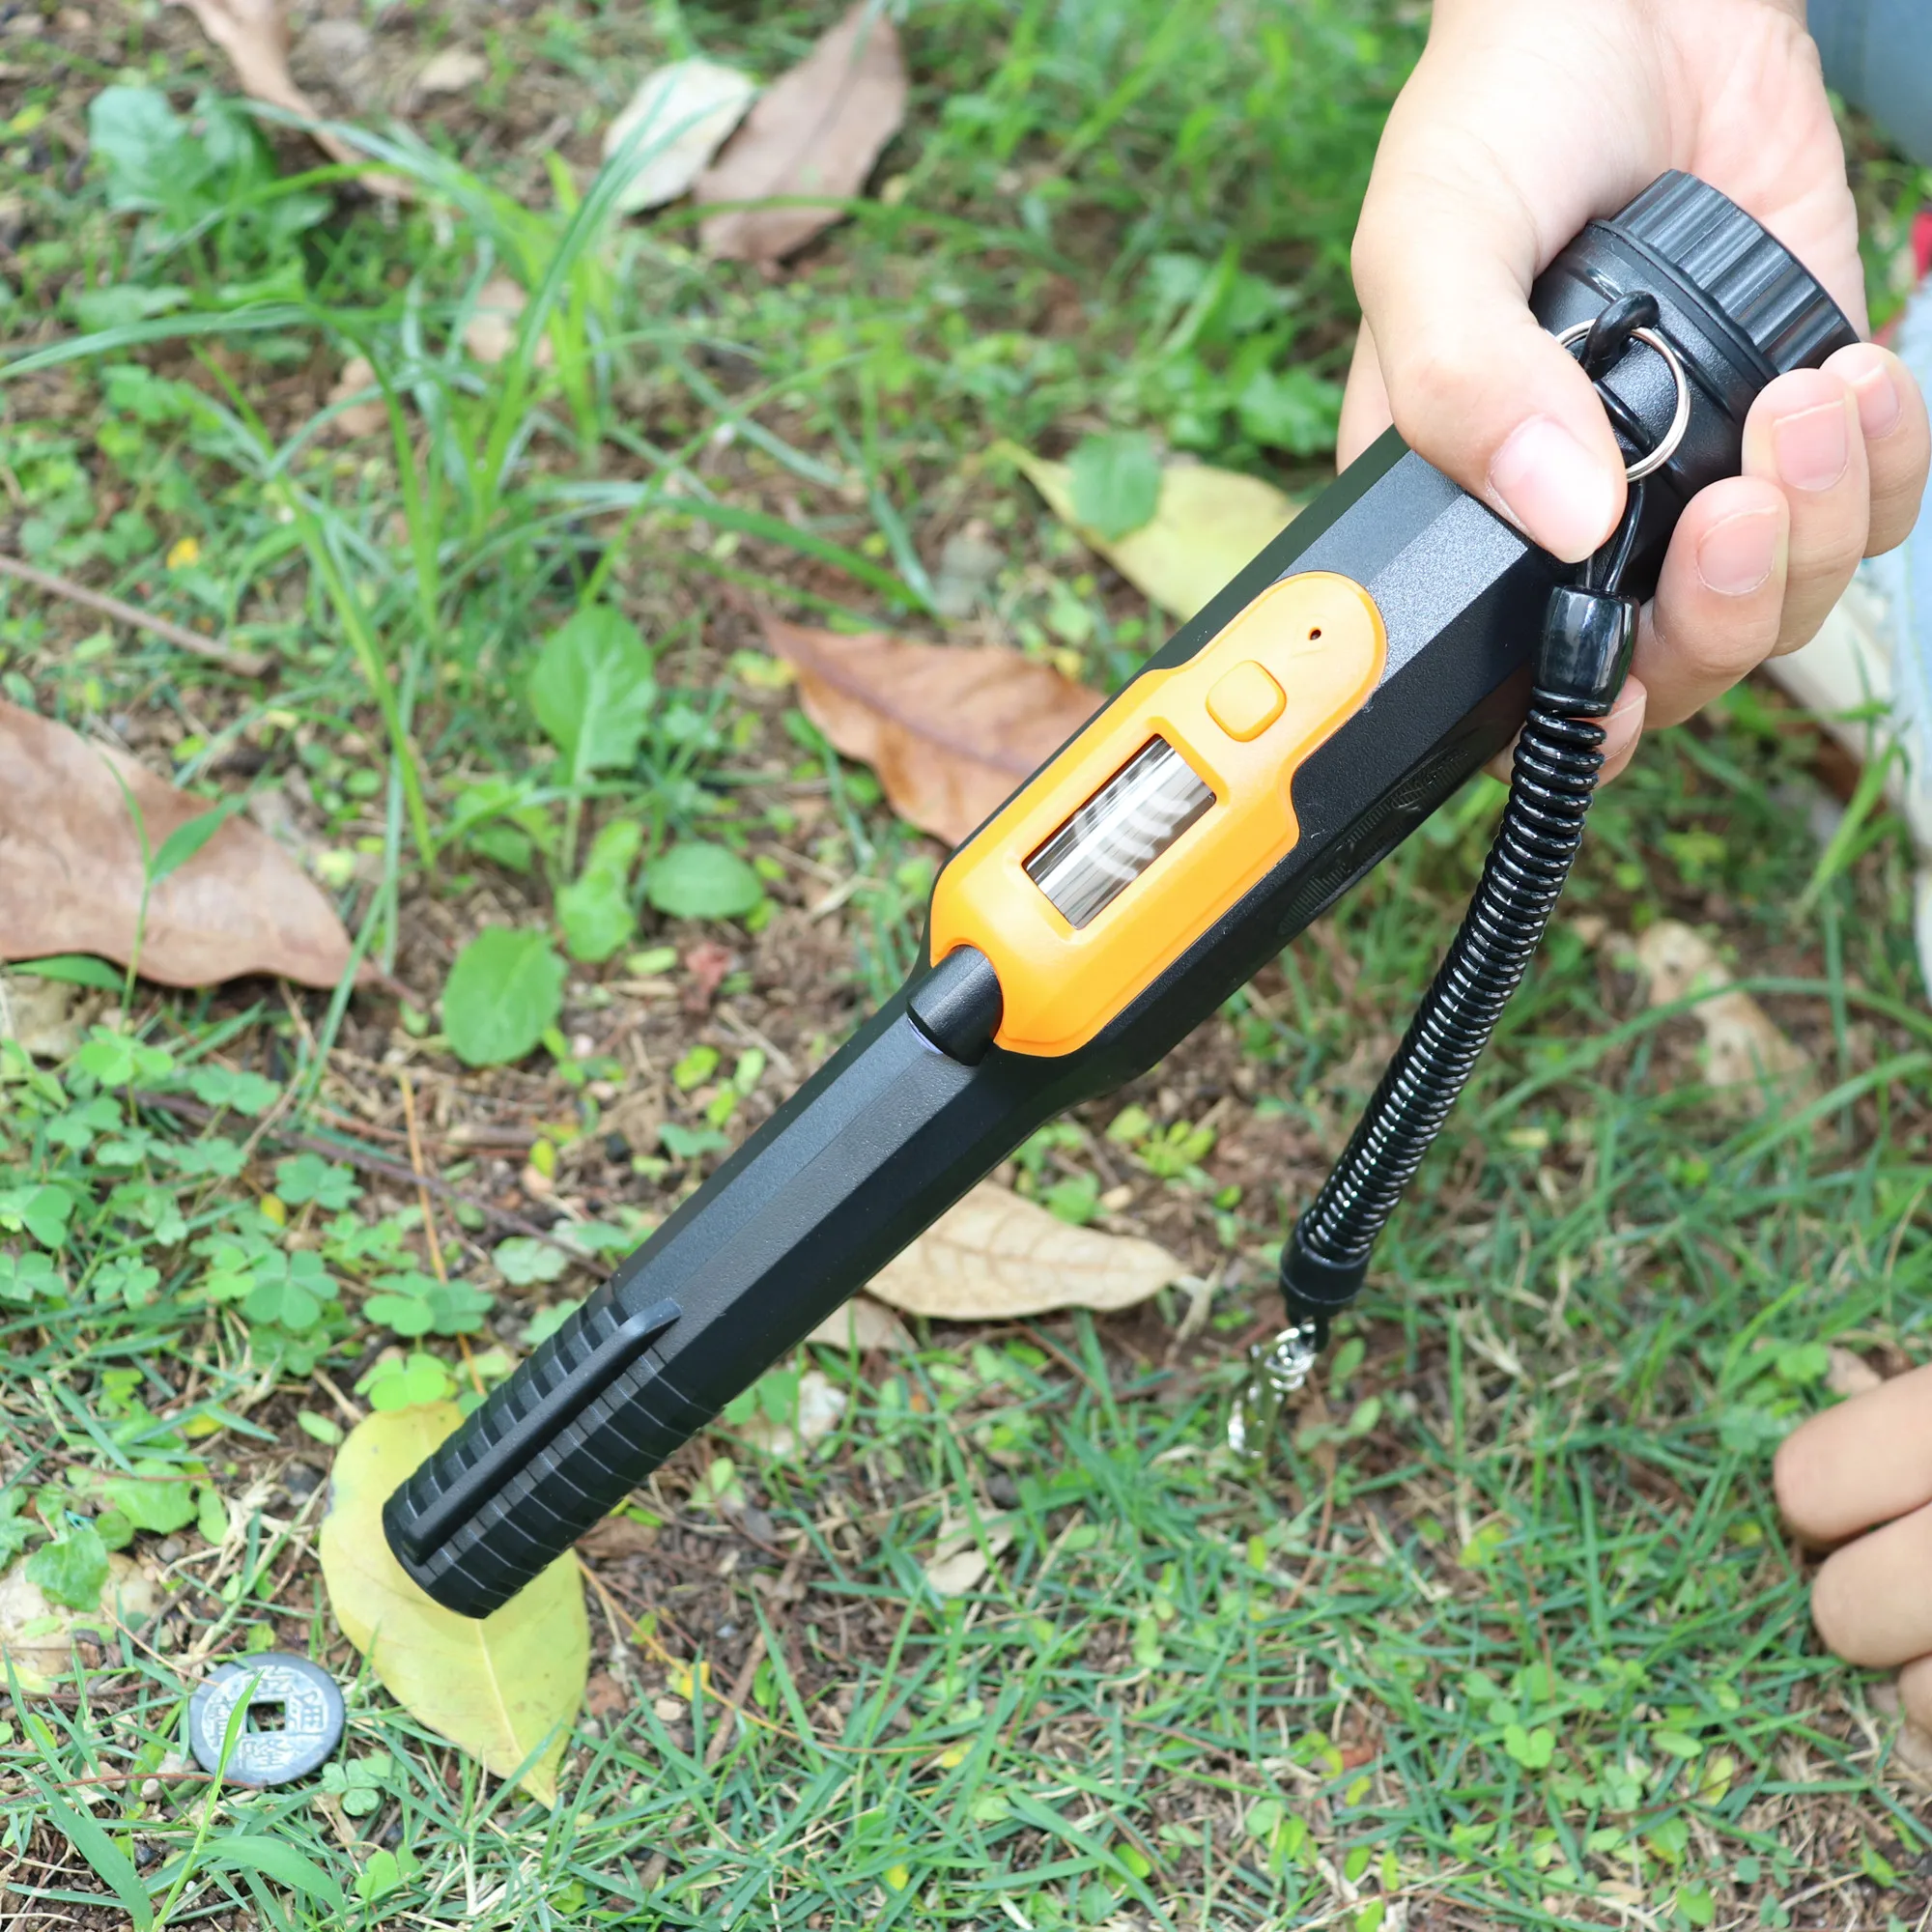 

New LCD Pin Metal Detector,Waterproof Handheld PinPointer 360 Degree Search Treasure Finder with High Sensitivity for All Metal